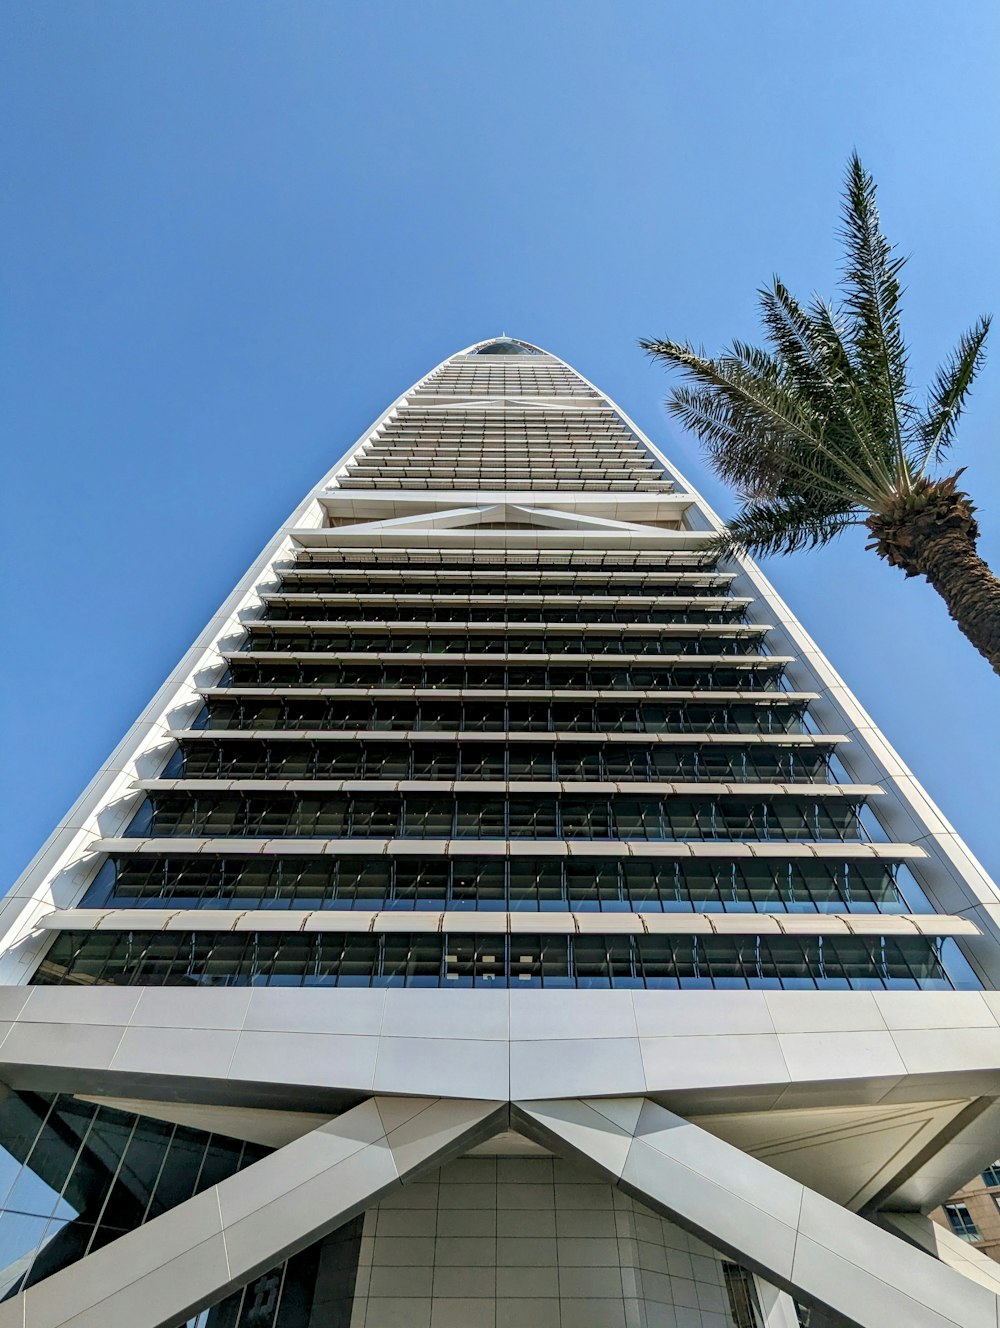 a tall building with a palm tree in front of it